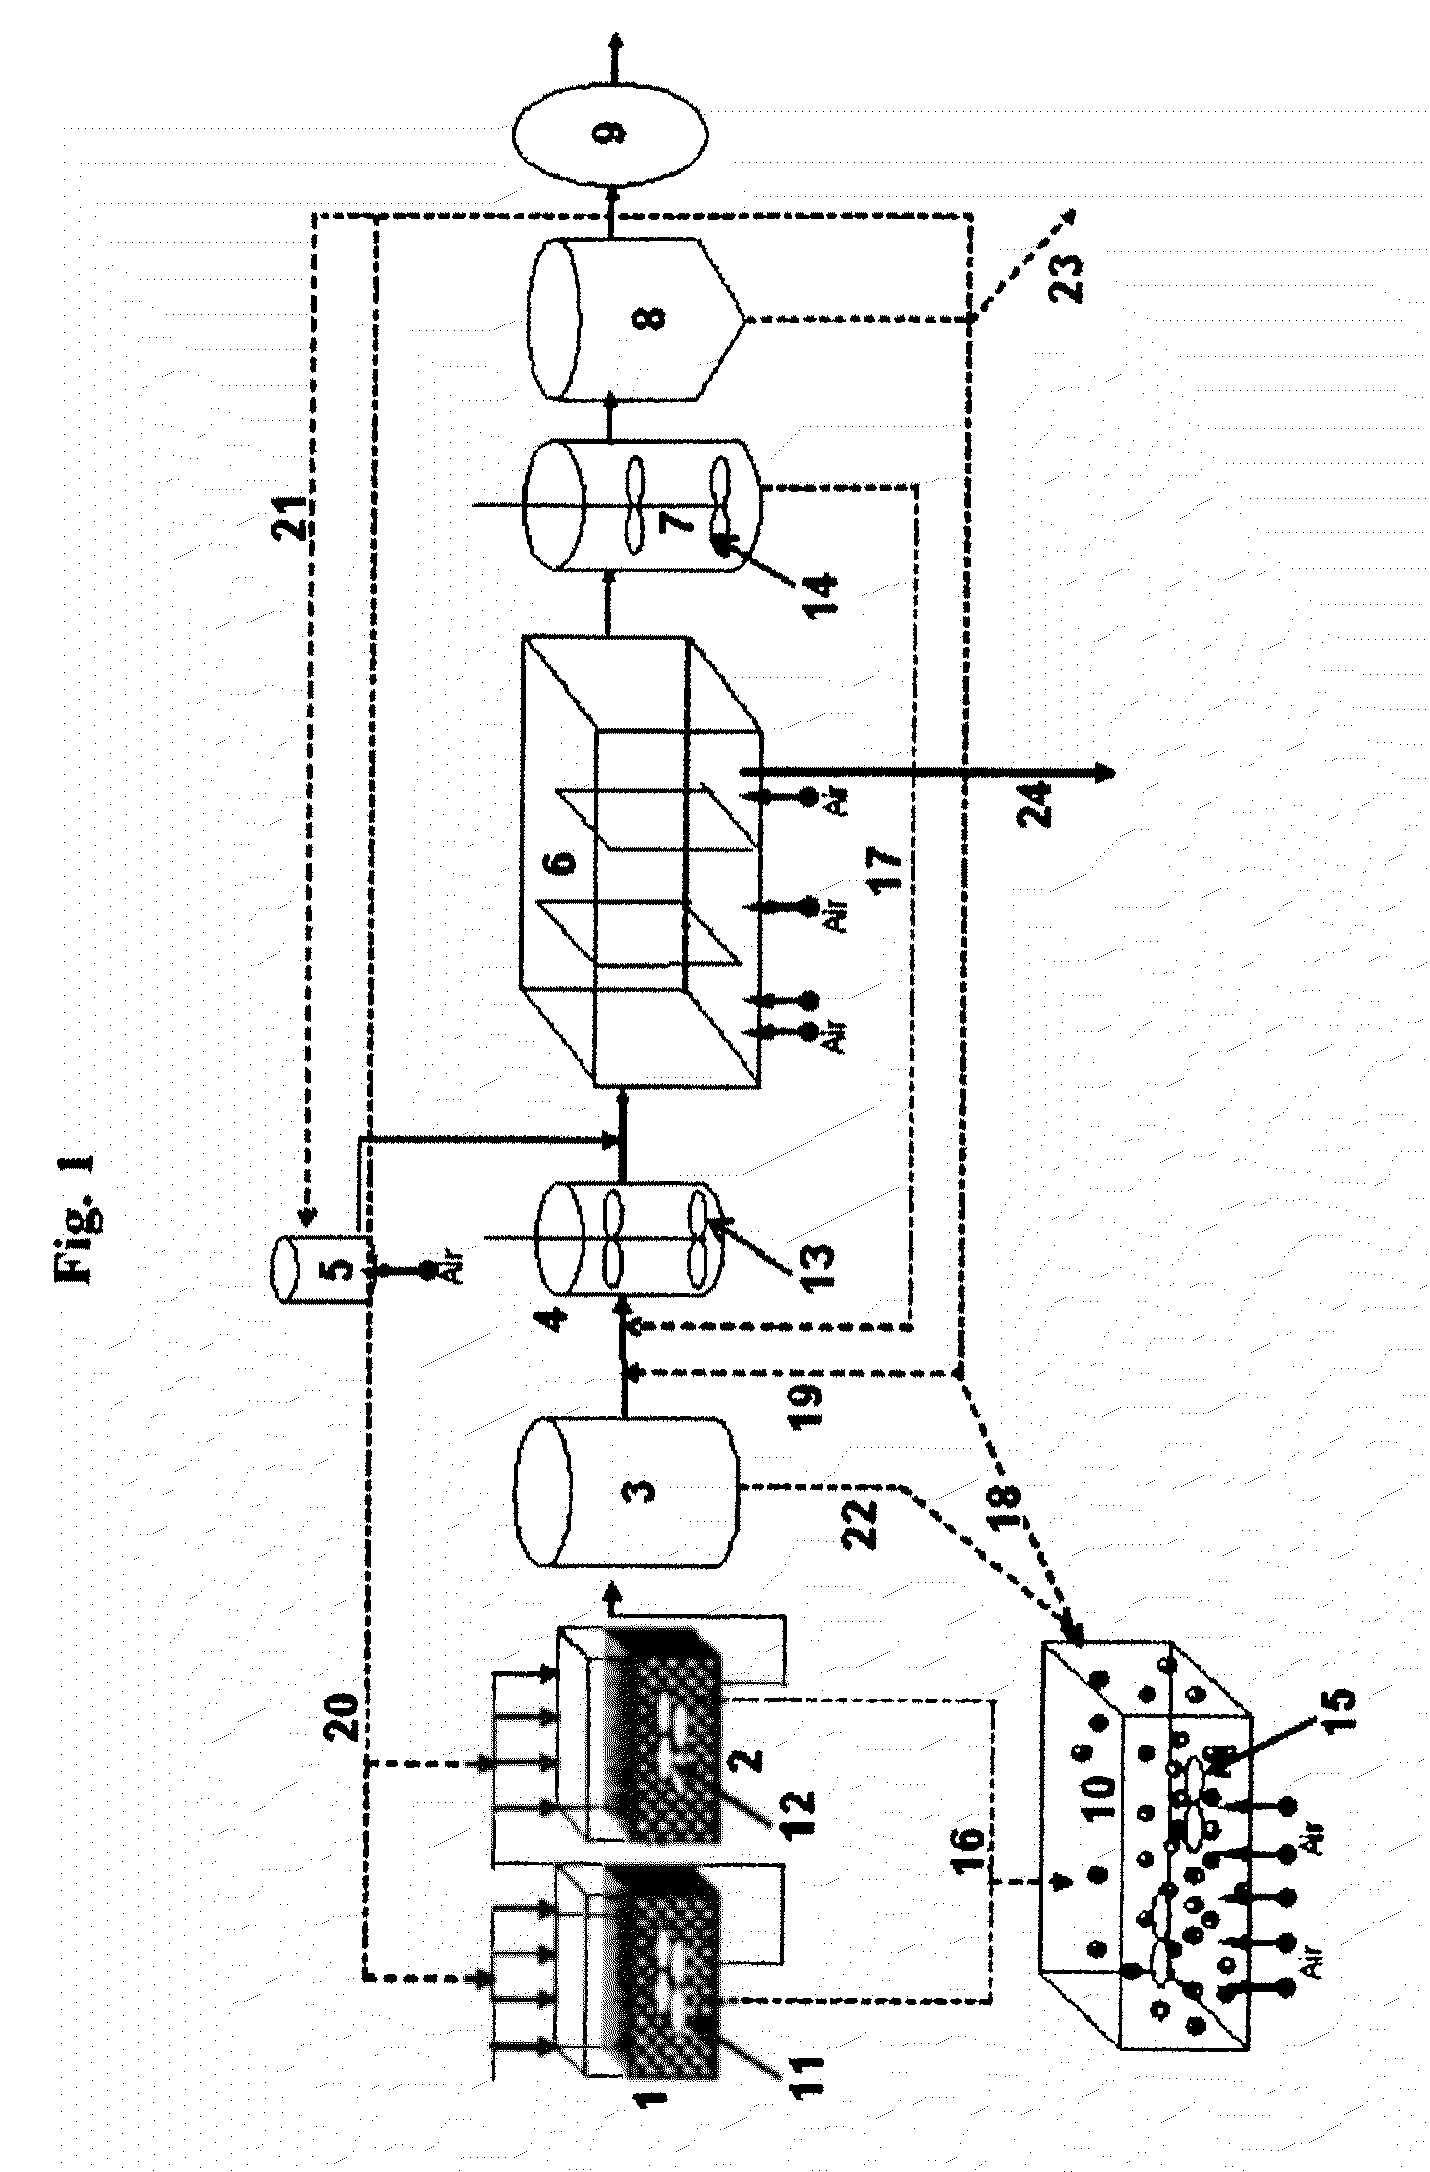 Method For Composting And Treating Food Waste By Using Wood Chips And Apparatus Therefor